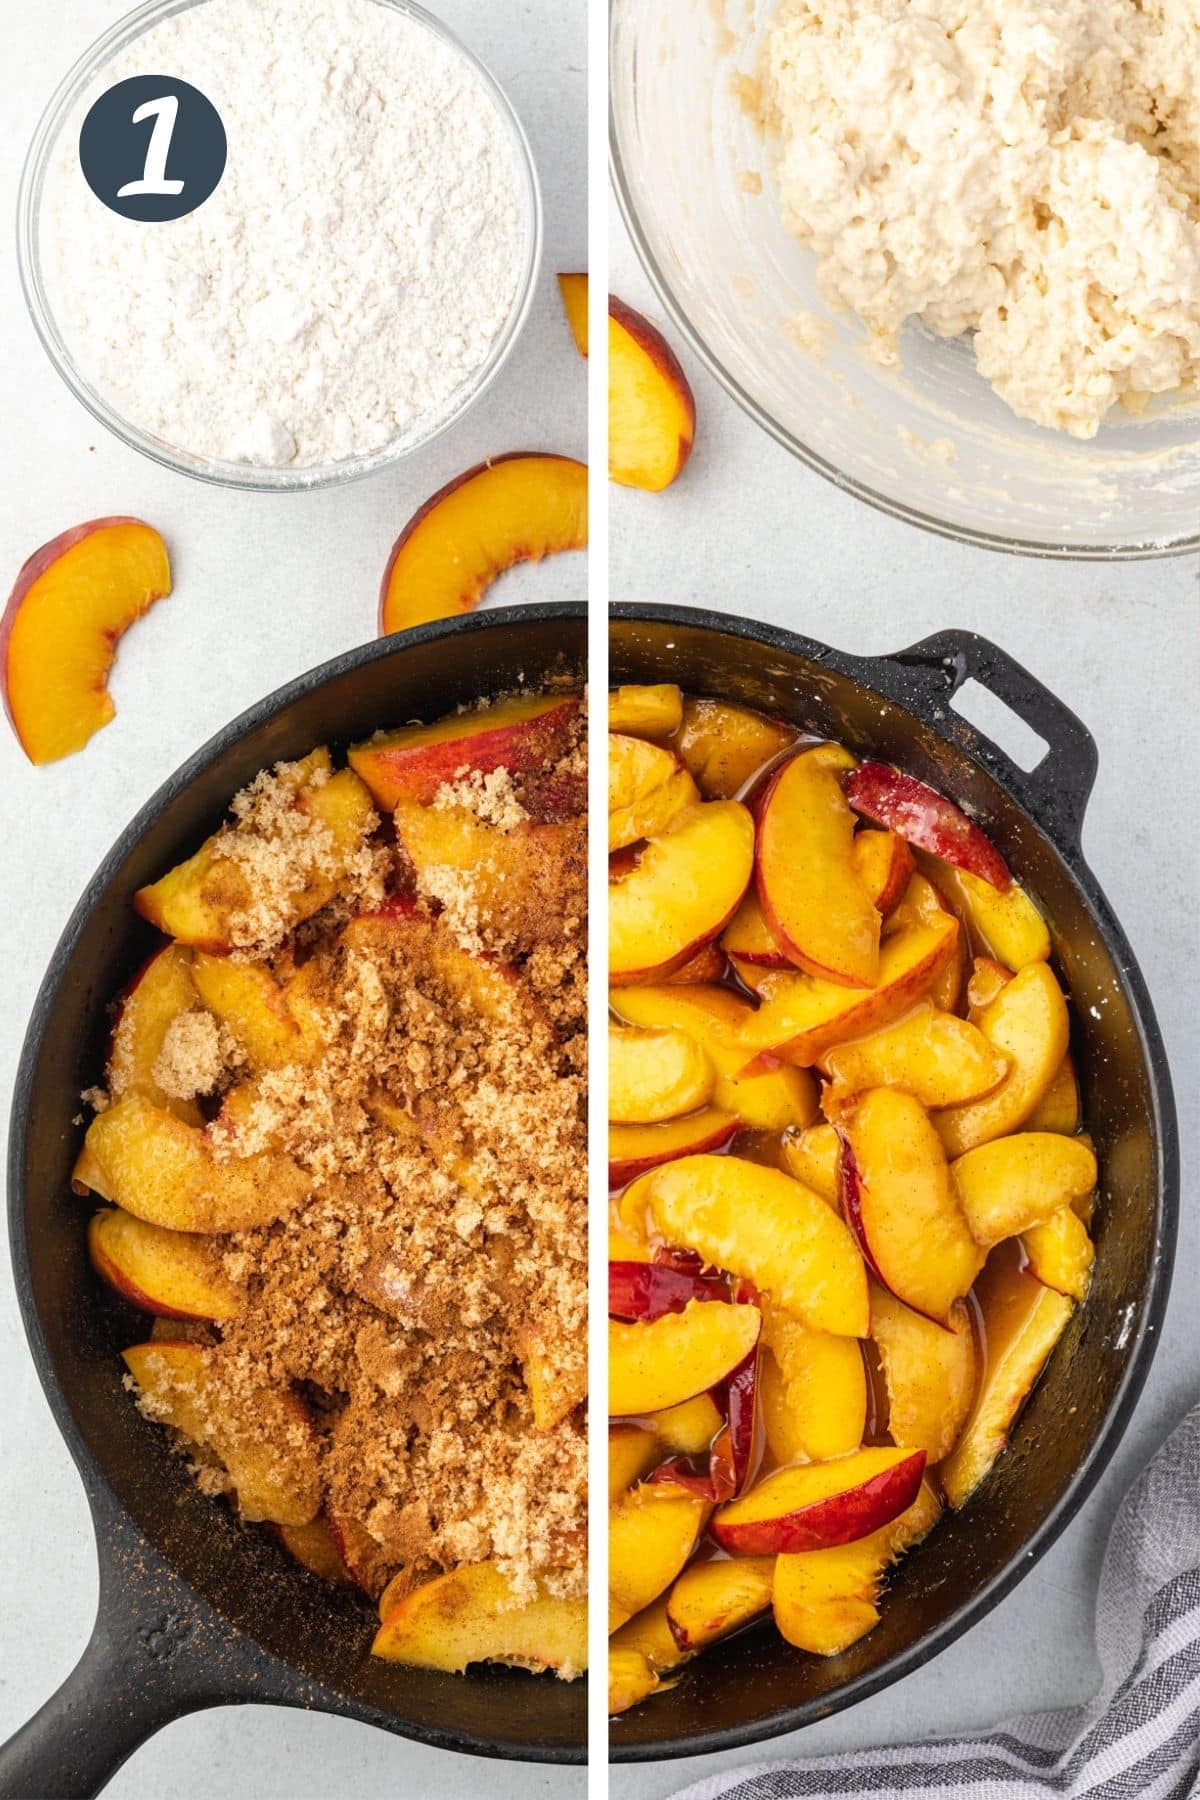 Split photo: Left side of peaches with spices on top, right is saucy cooked peaches in skillet.